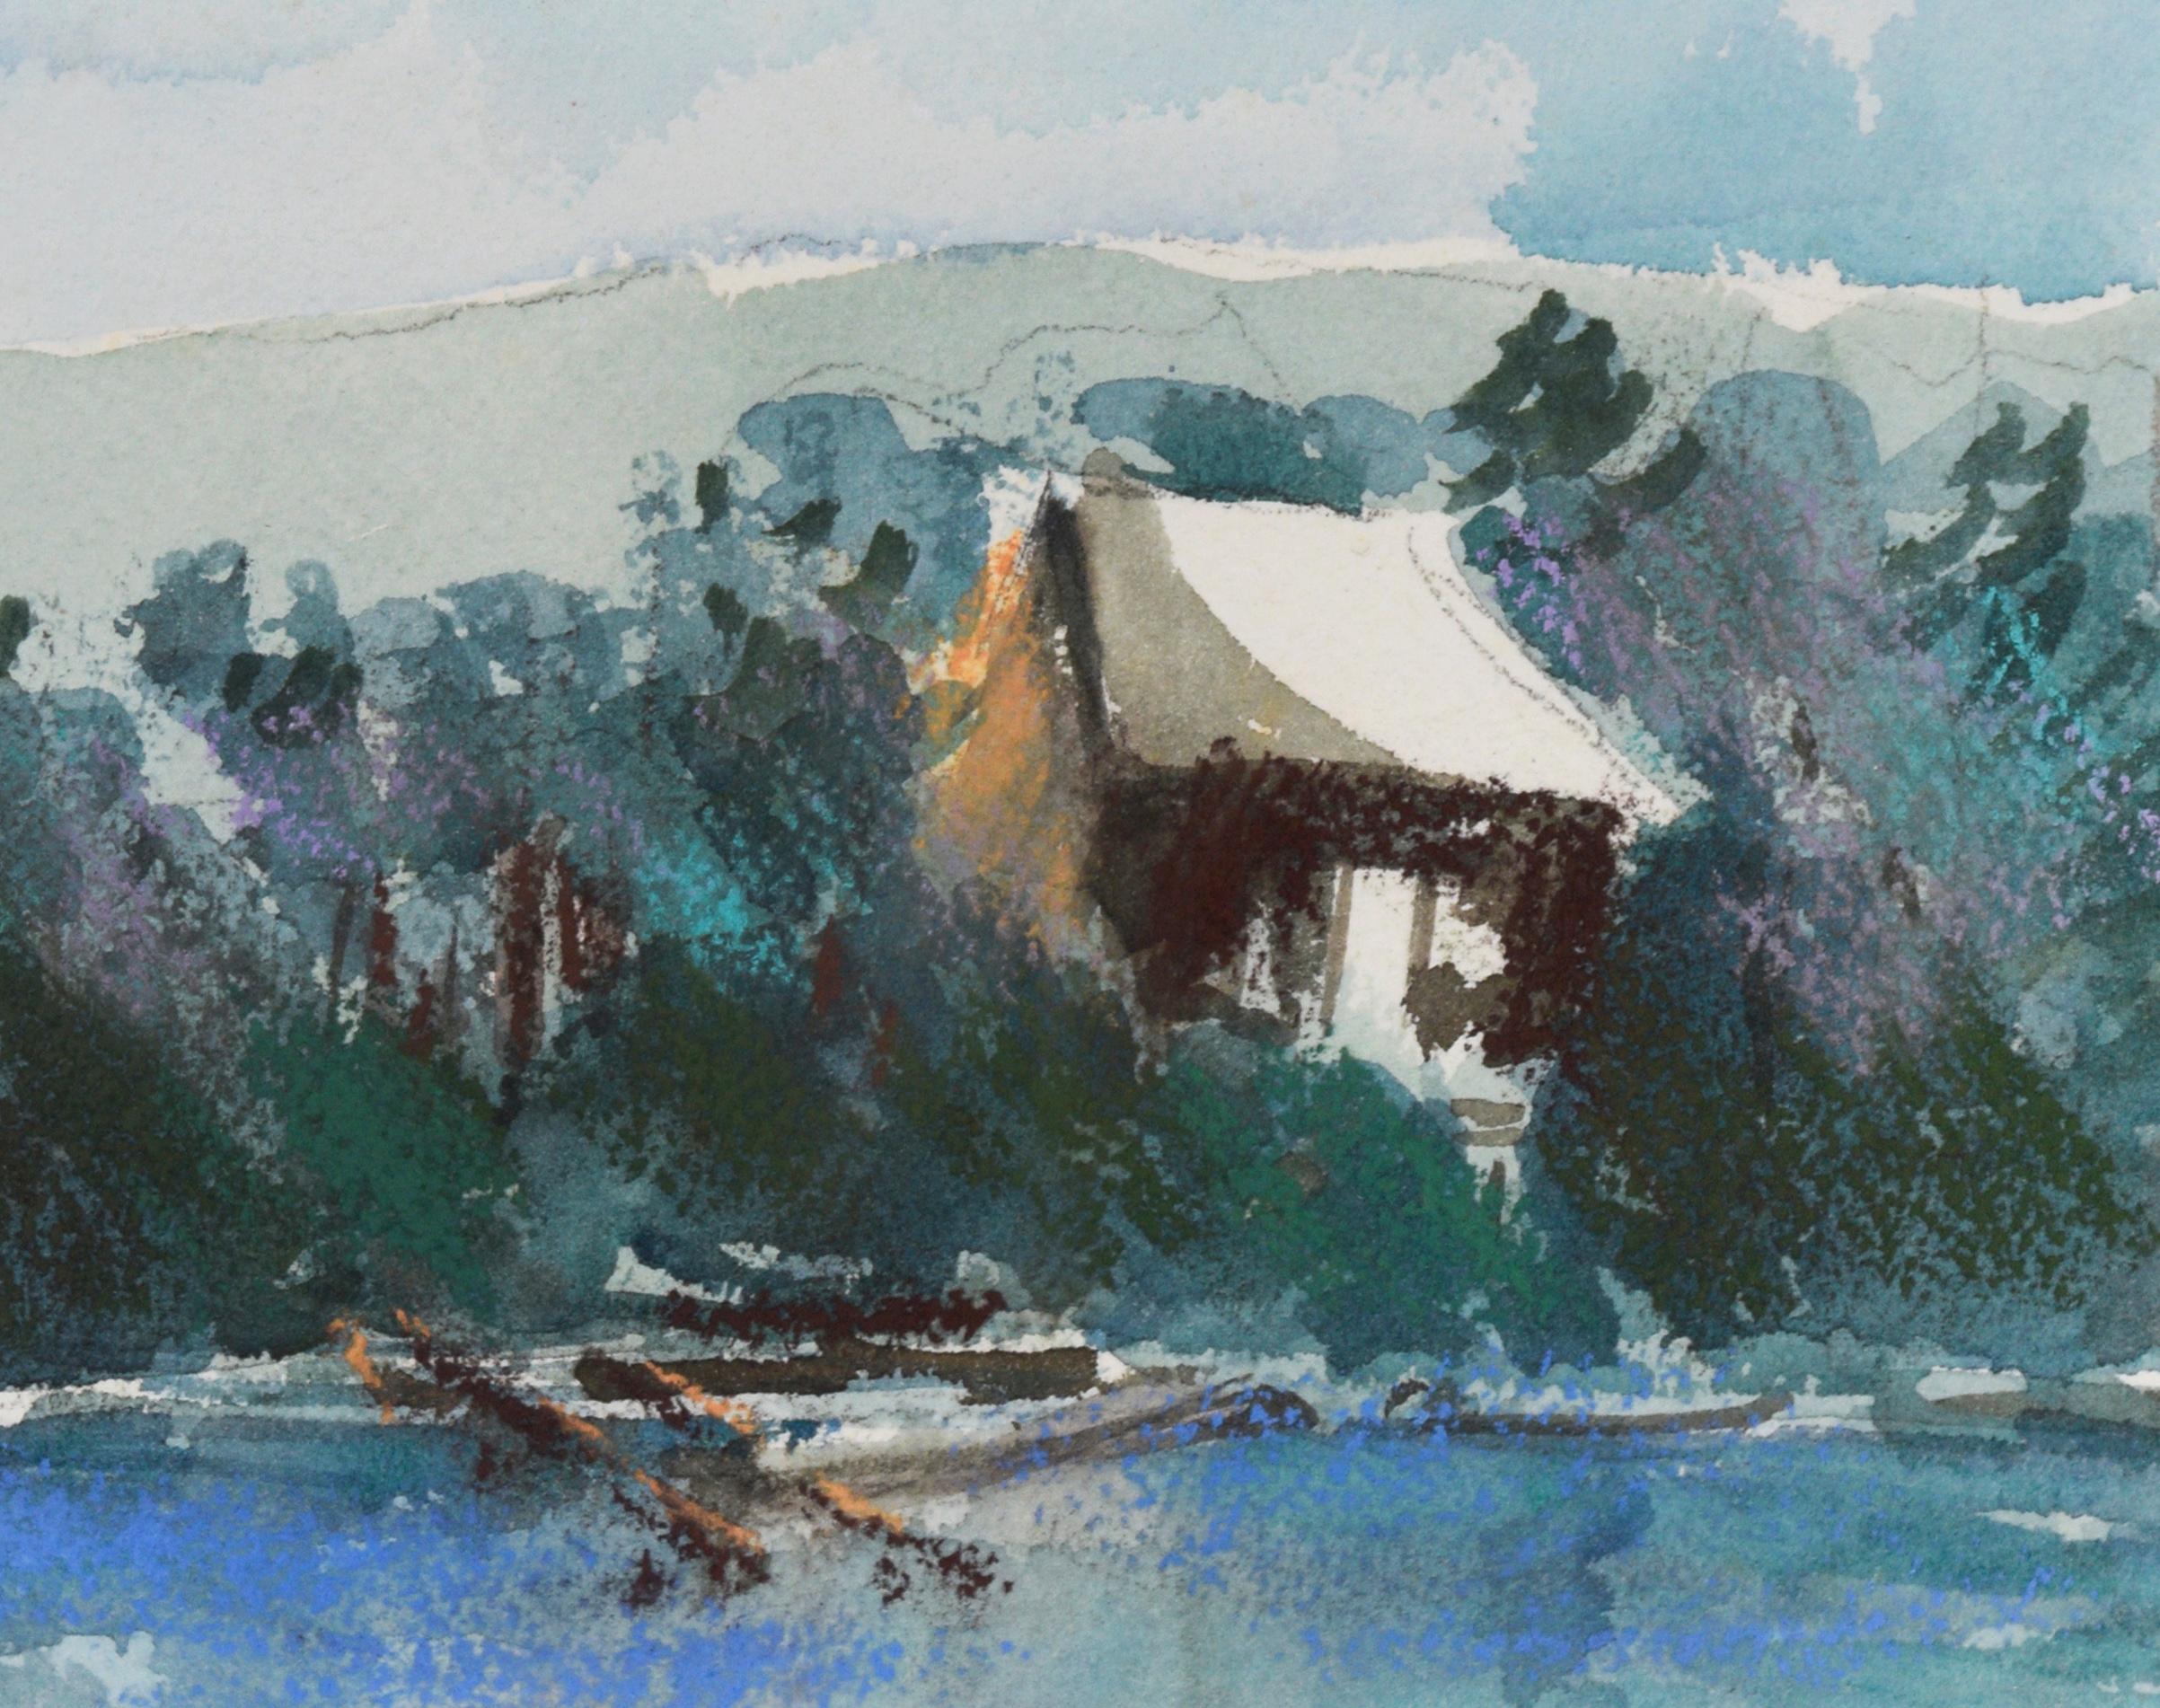 Lakeside Cabin - Pastel and Watercolor on Paper - American Impressionist Painting by Unknown